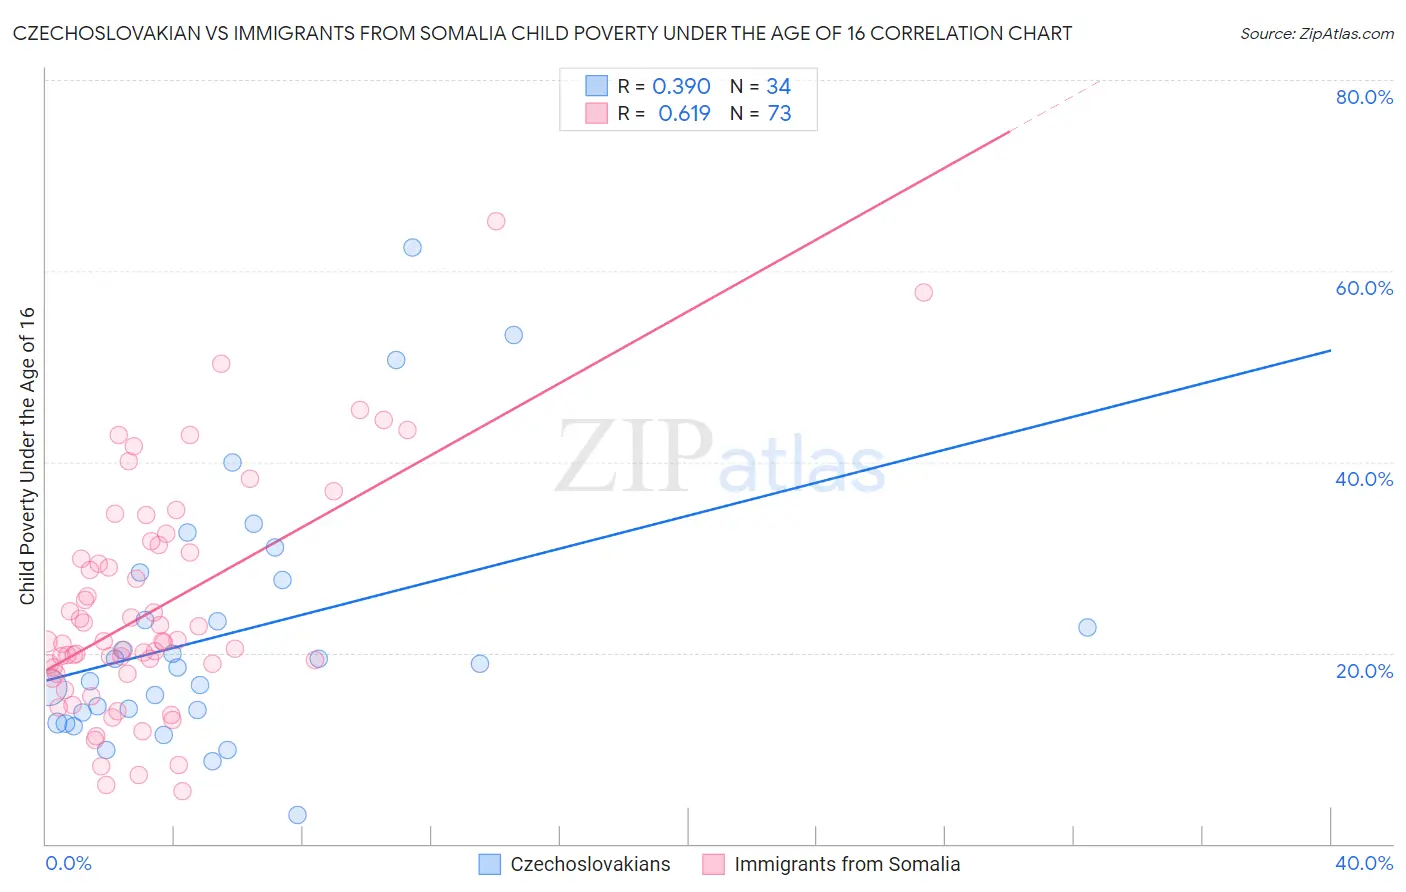 Czechoslovakian vs Immigrants from Somalia Child Poverty Under the Age of 16